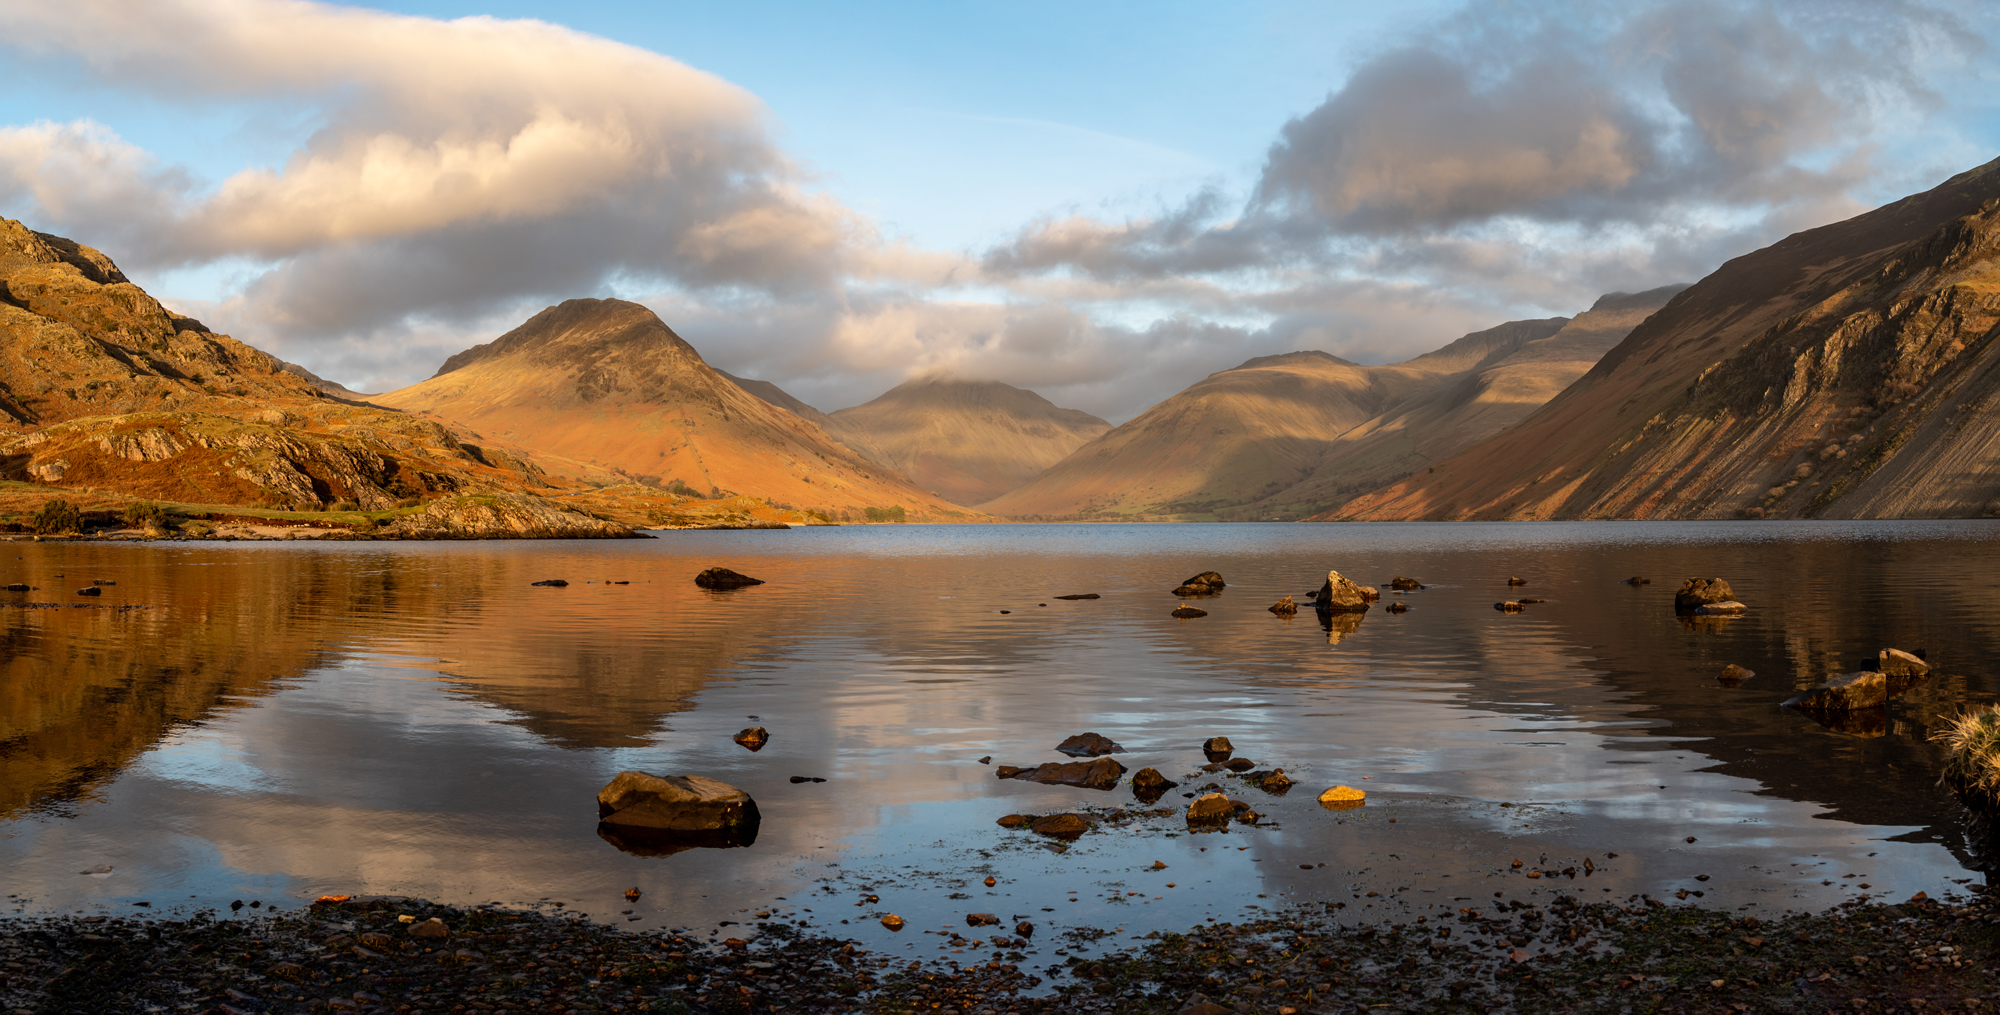 Wastwater (Hk26x18inch)